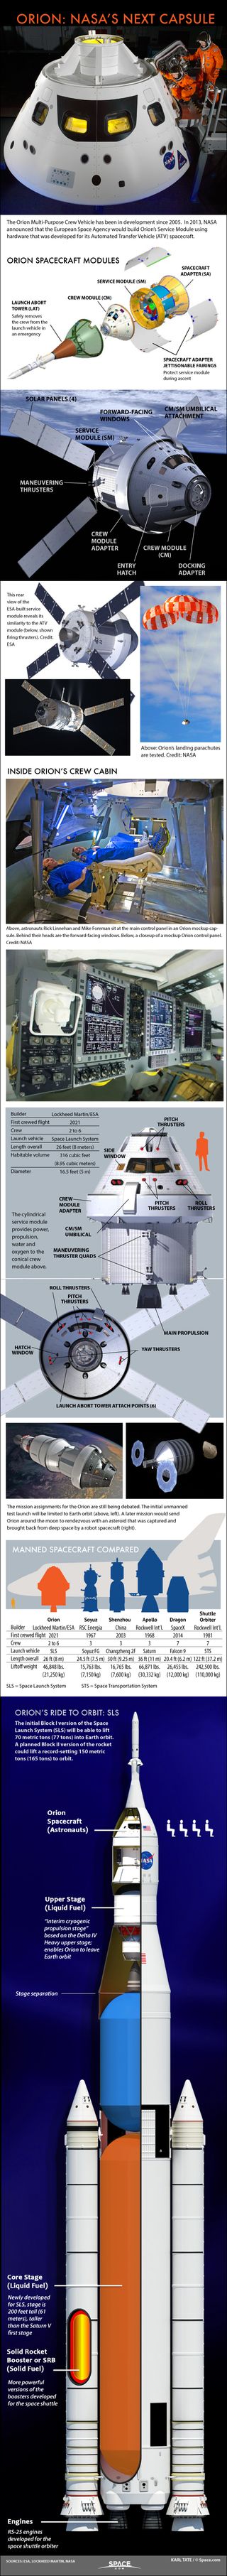 NASA's Orion deep-space capsule is slated to be the go-to spacecraft for missions to an asteroid and beyond. See how NASA's Orion spacecraft will work in this Space.com infographic.